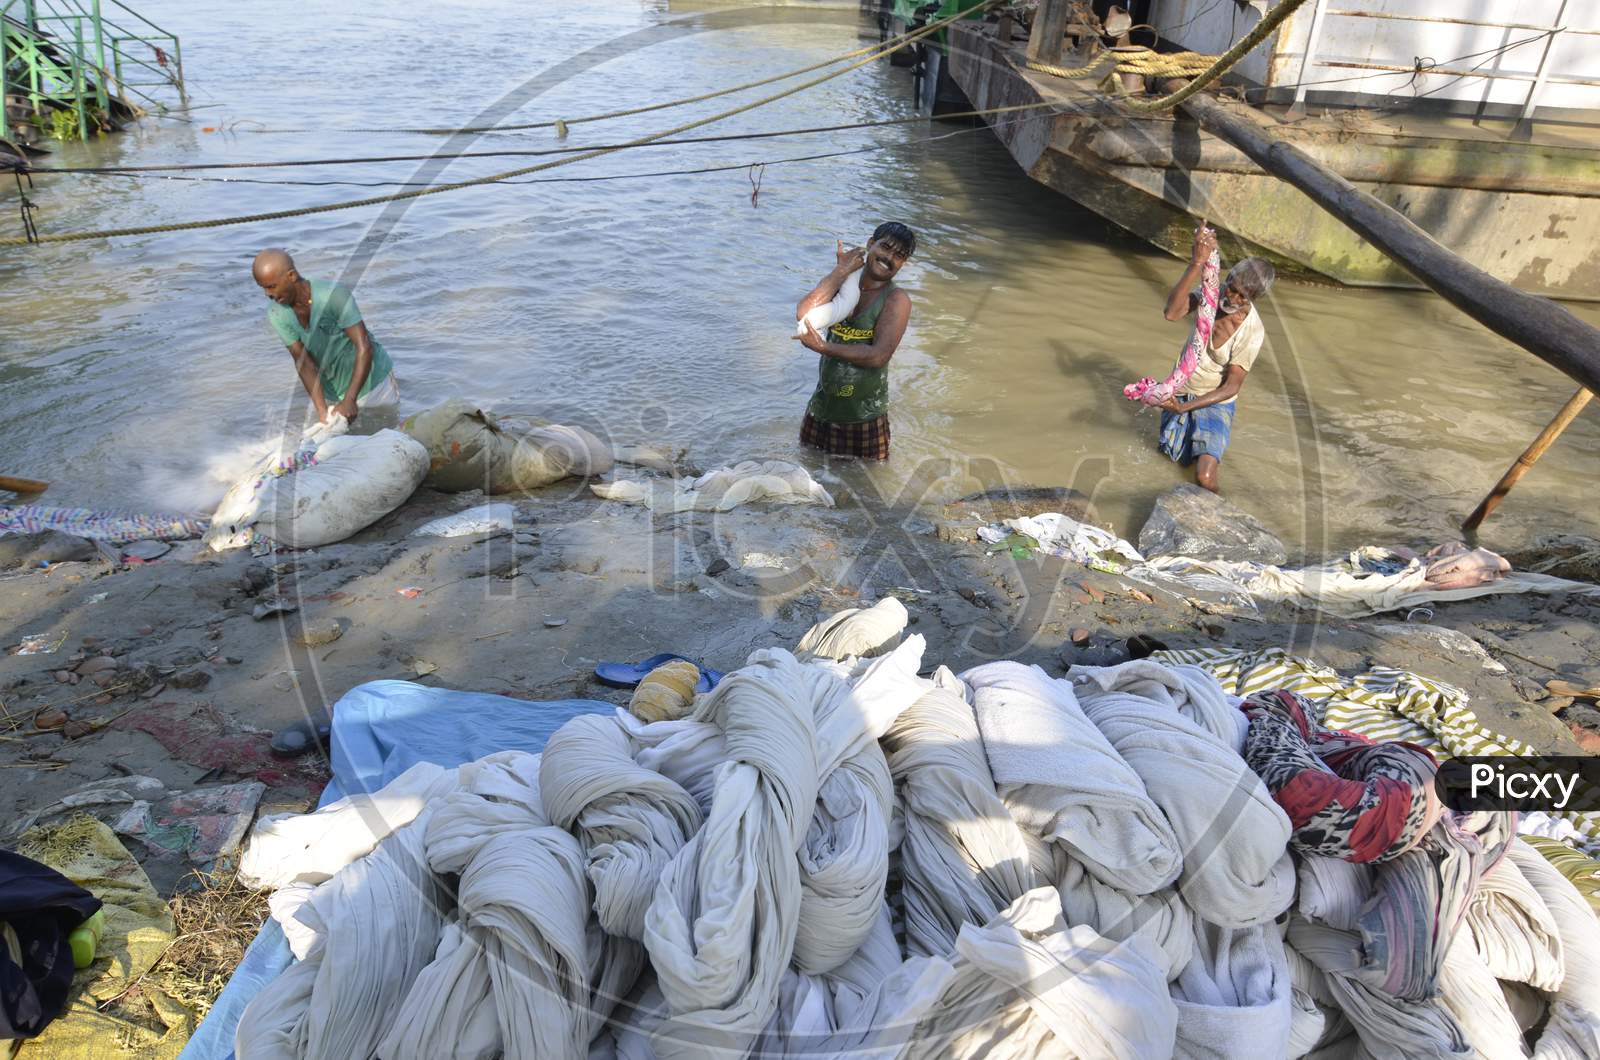 Indian Washerman or Dhobi Washing Clothes on A River Bank